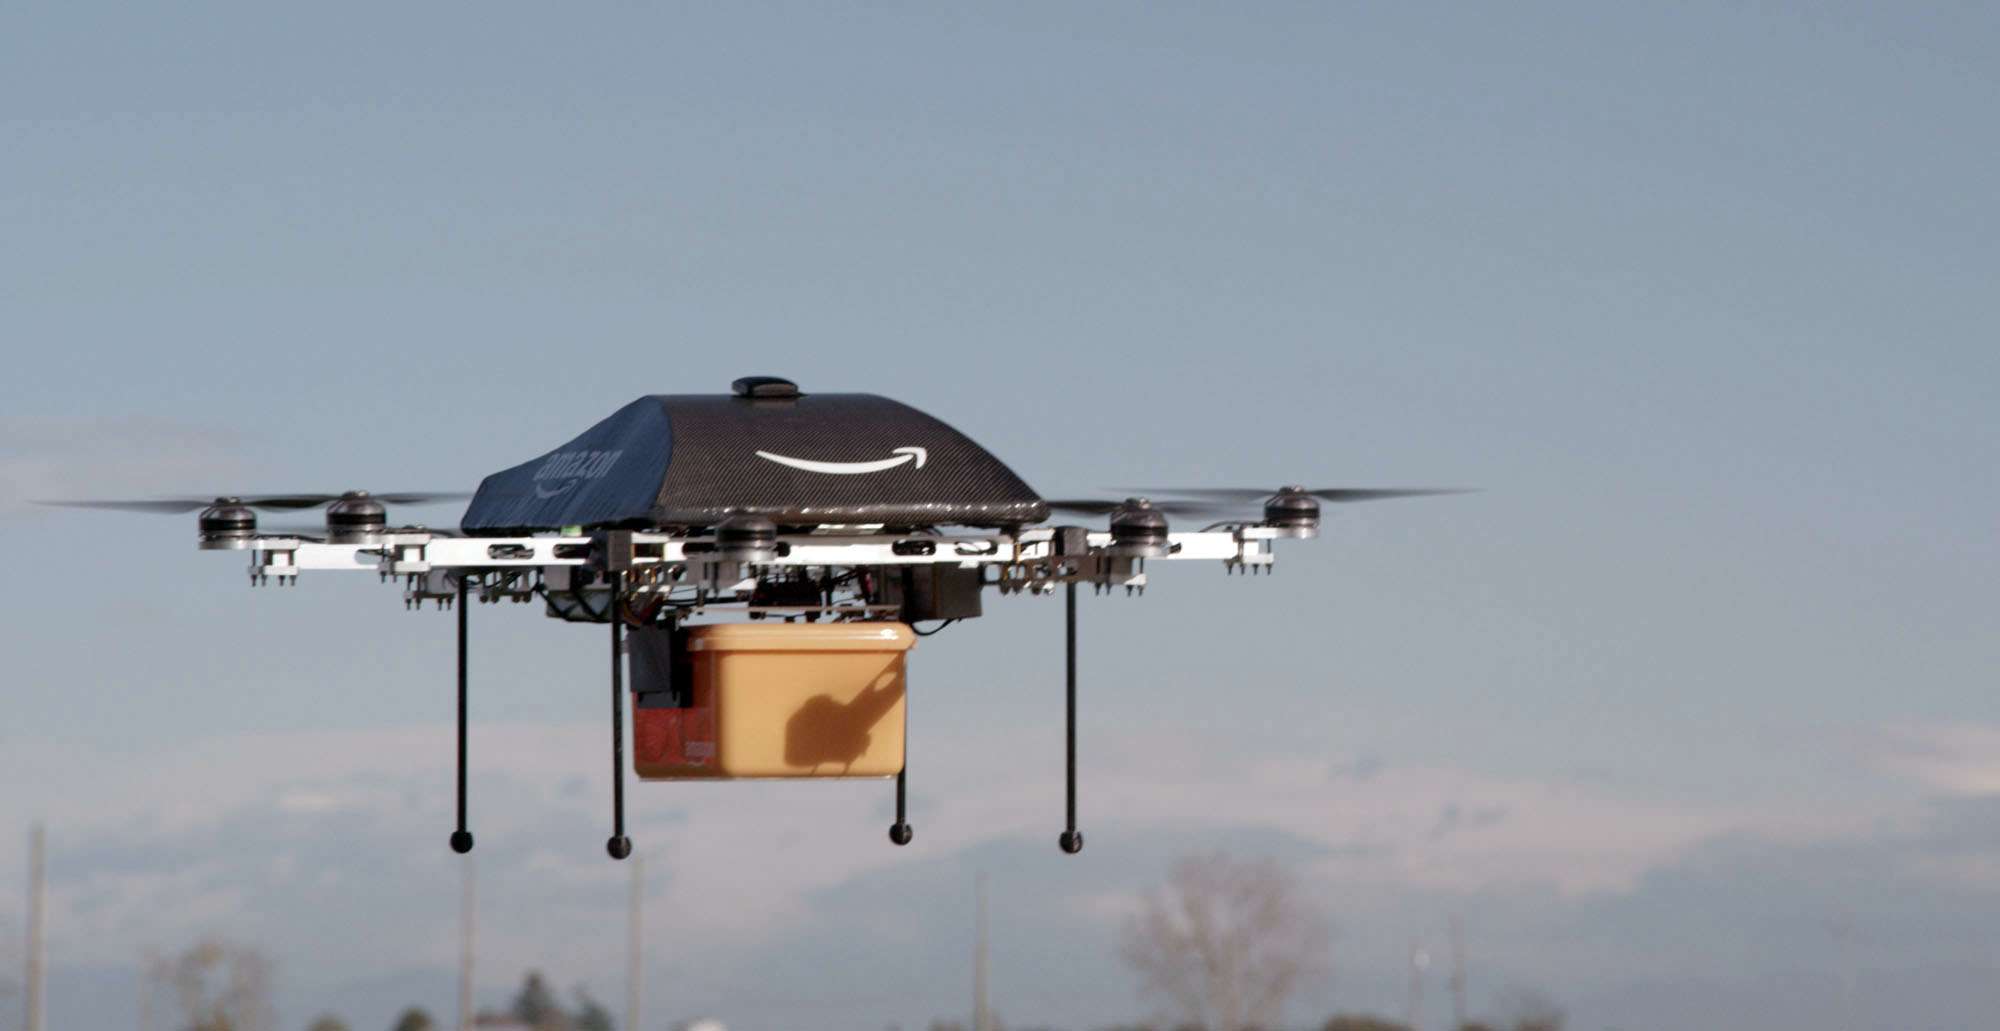 Amazon ’s CEO Jeff Bezos has said there is no reason why drones can't help get goods to customers within 30 minutes or less. Photo: AP